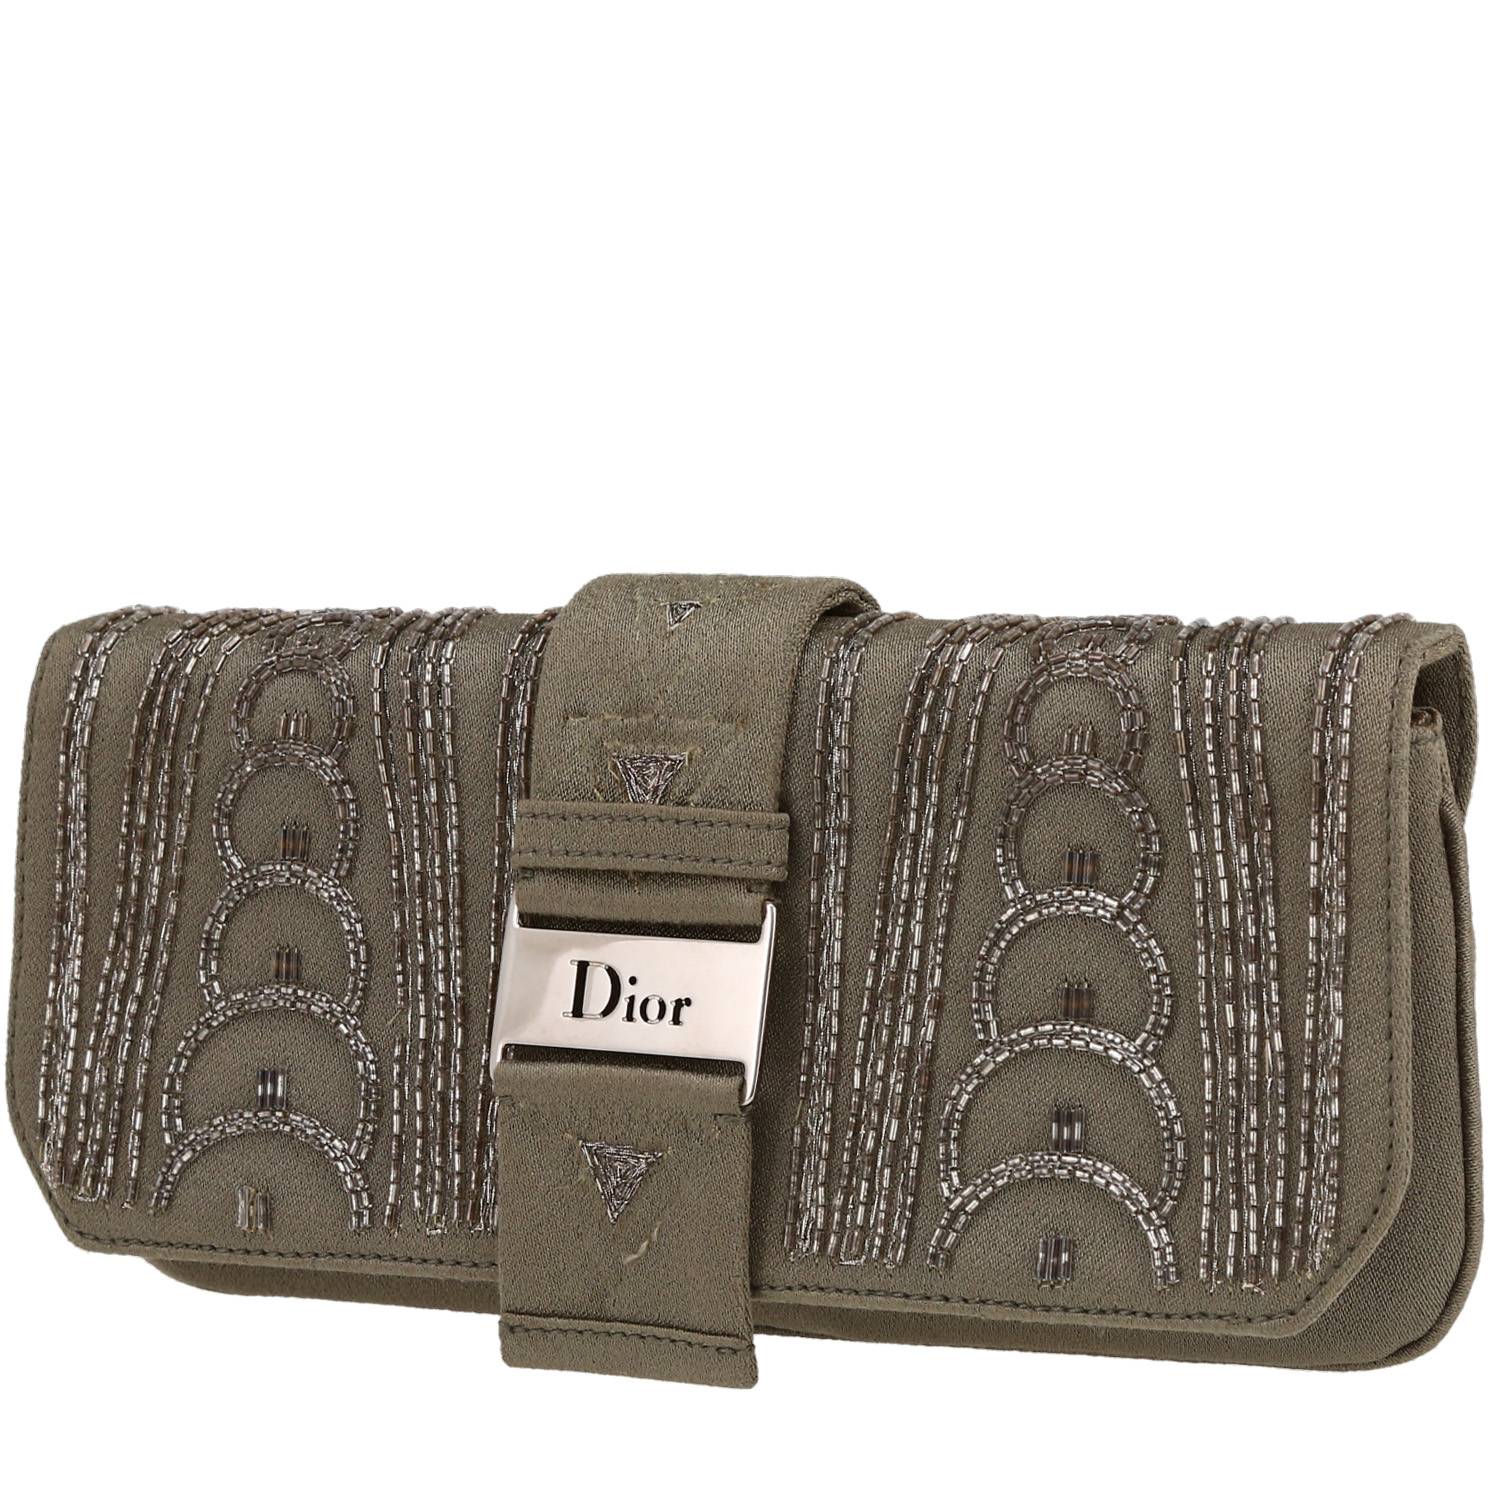 Dior pouch in green satin and grey pearl - 00pp